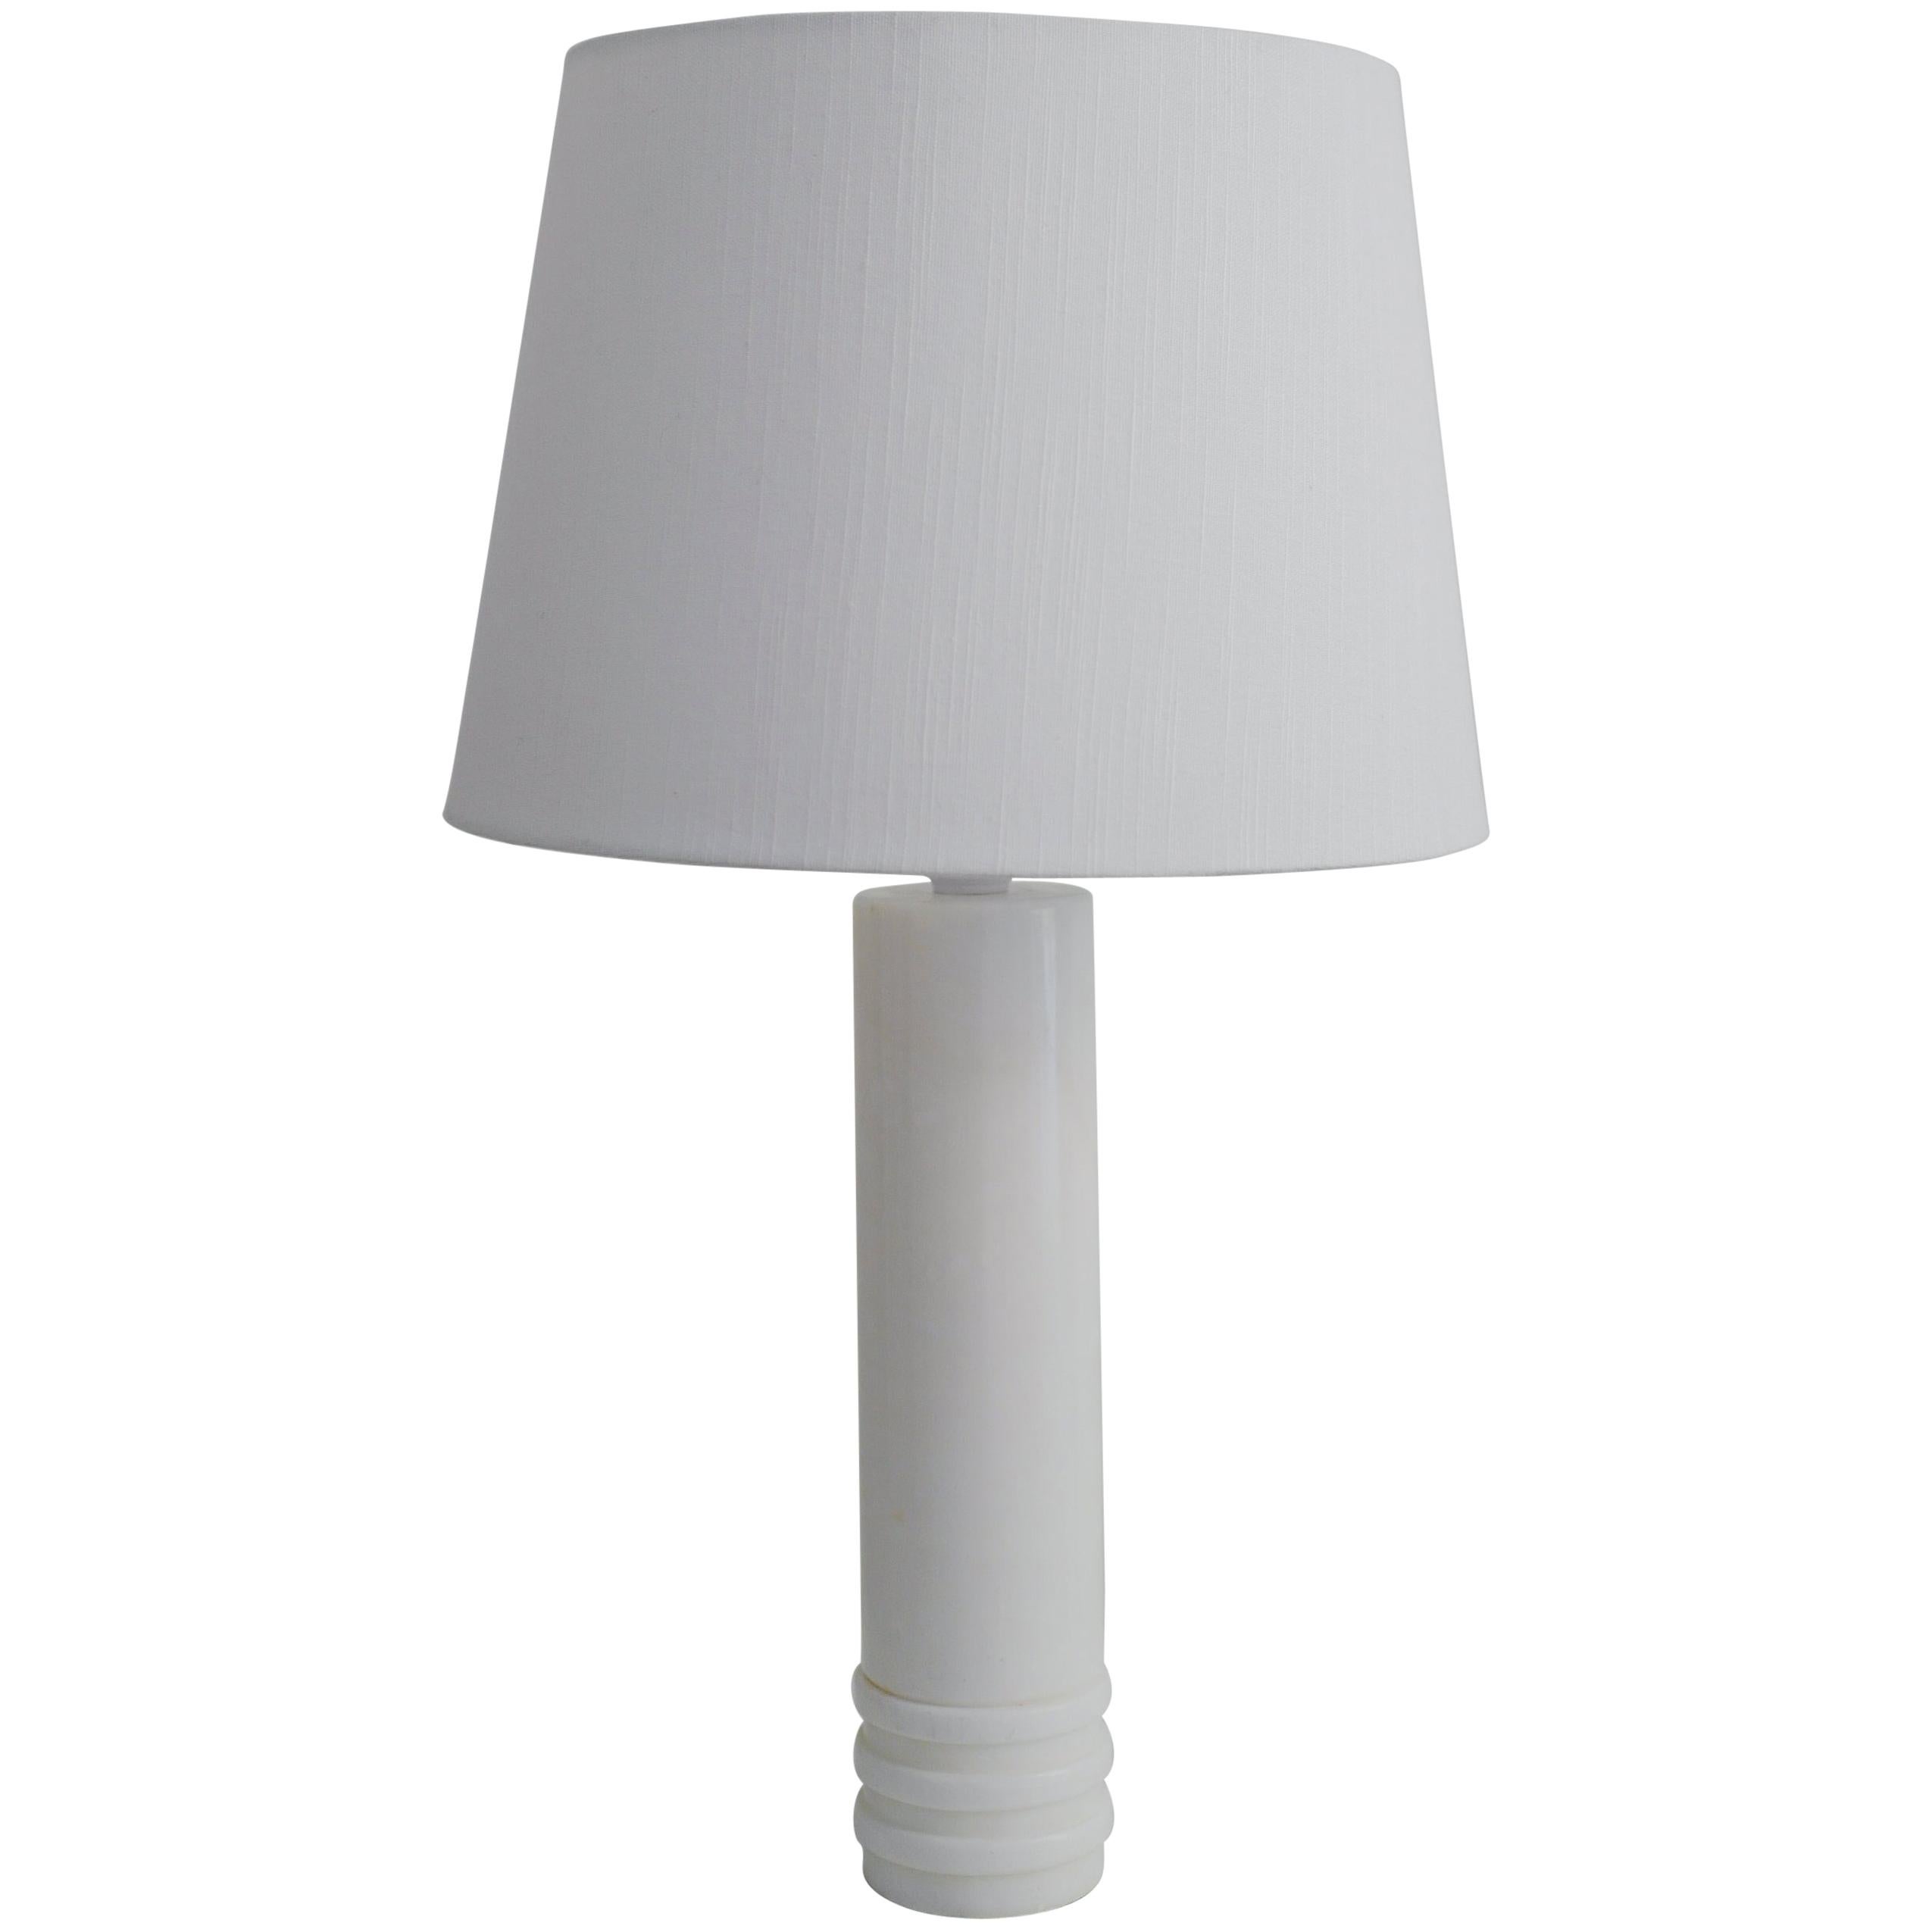 1960s Table Lamp Model B09 in Marble by Bergboms, Sweden